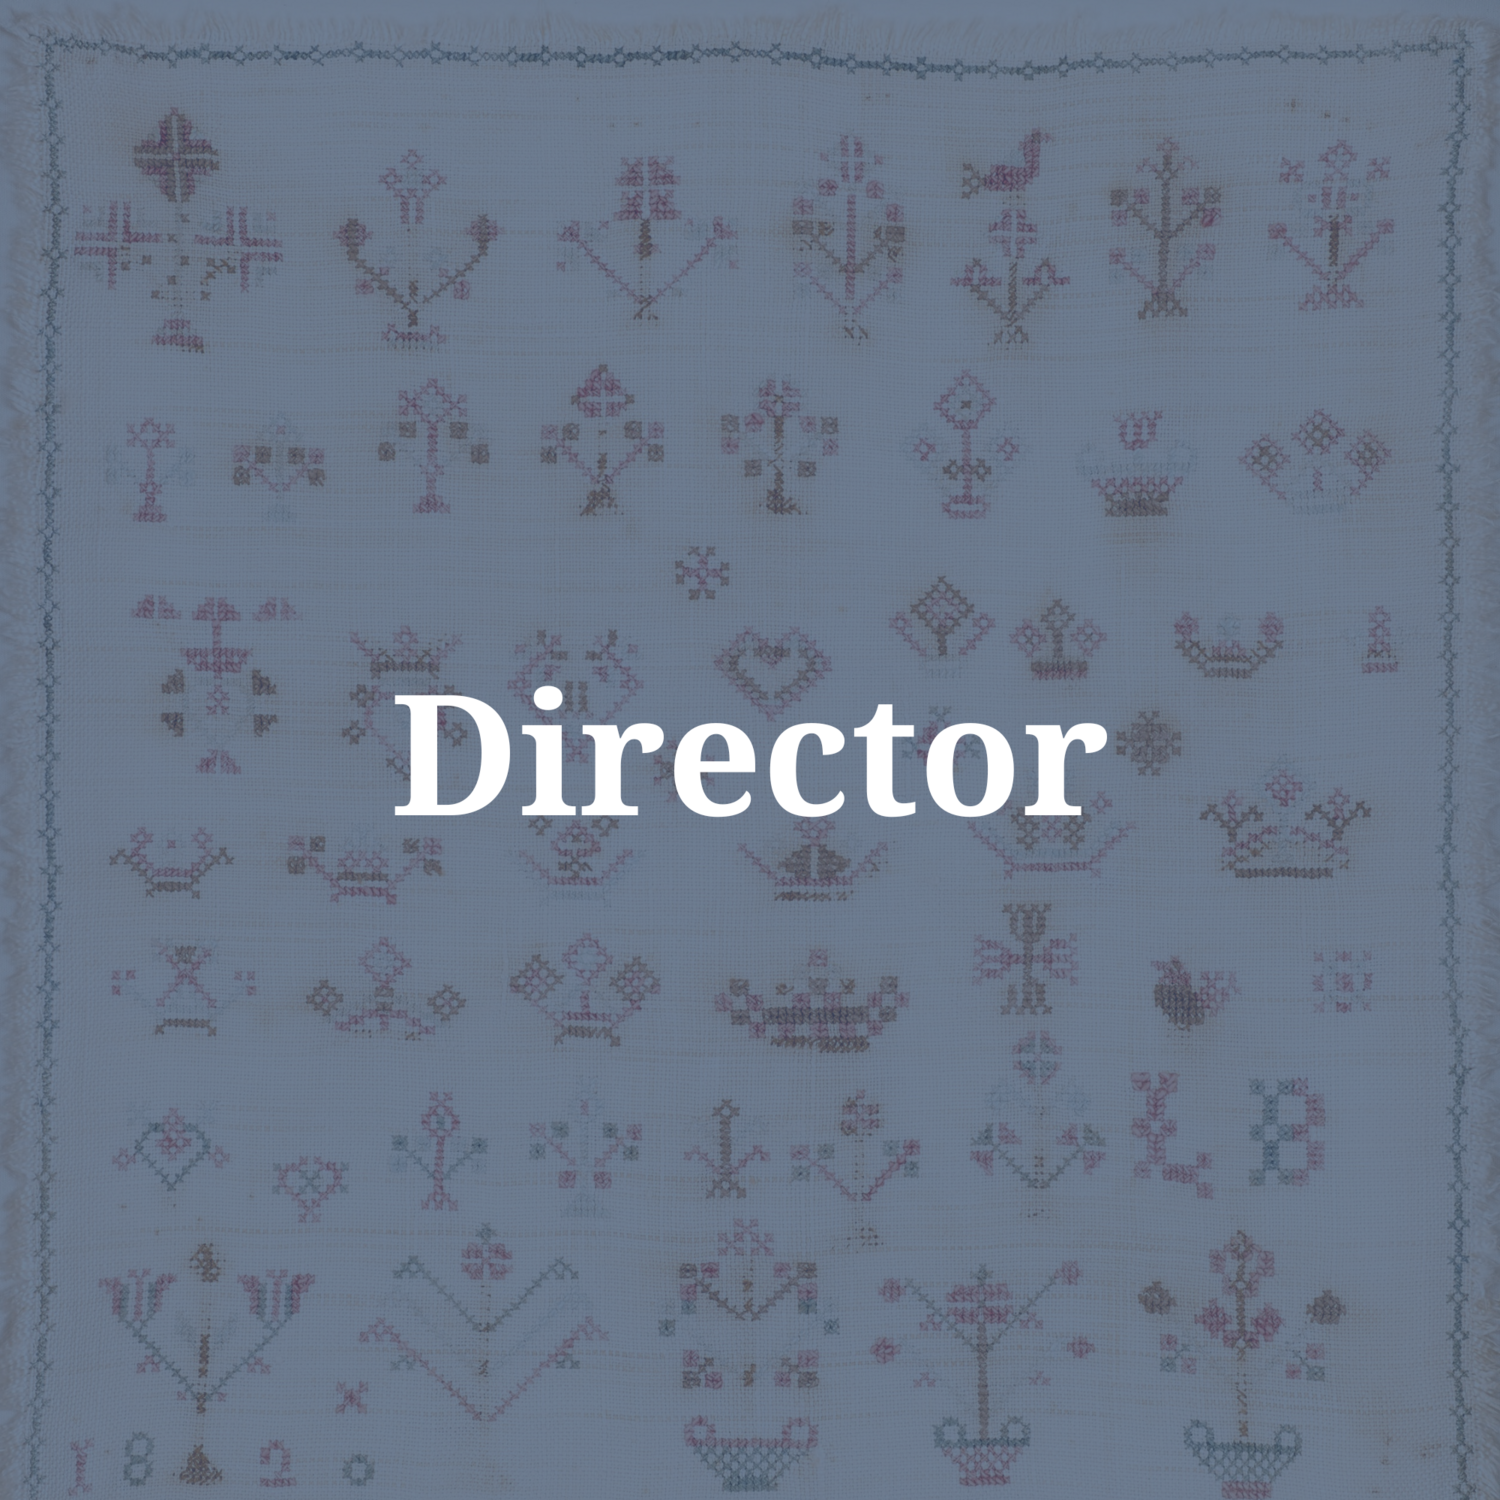 Collections Guild - Director Membership